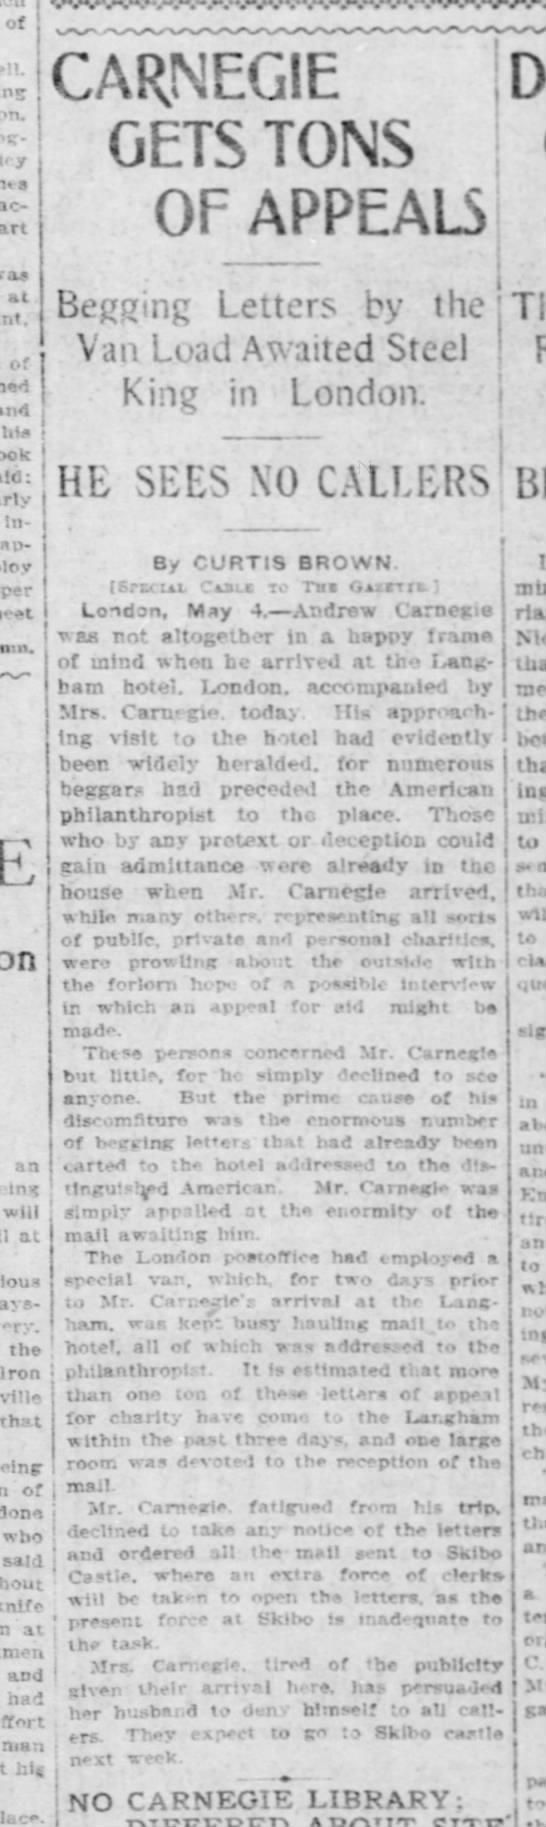 Andrew Carnegie receives 1 ton of begging letters in 3 days - Pgh Gazette 5 May 1903 p1 - 